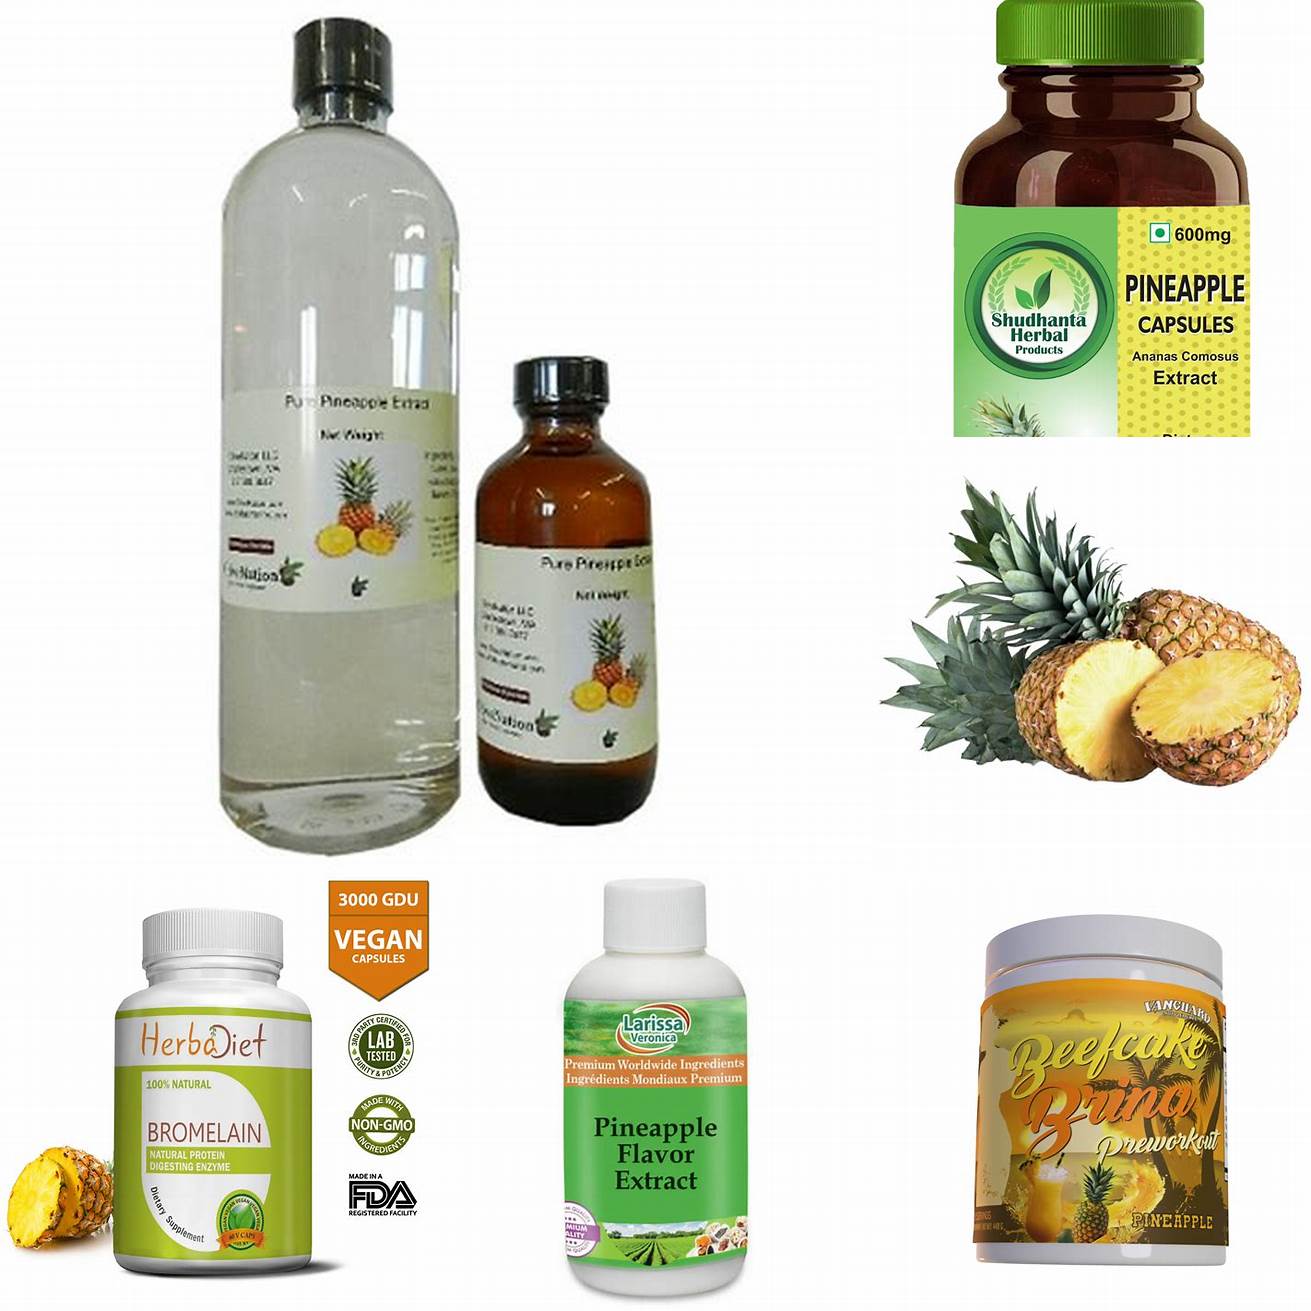 Pineapple Supplements Look for cat-friendly supplements that contain pineapple extract